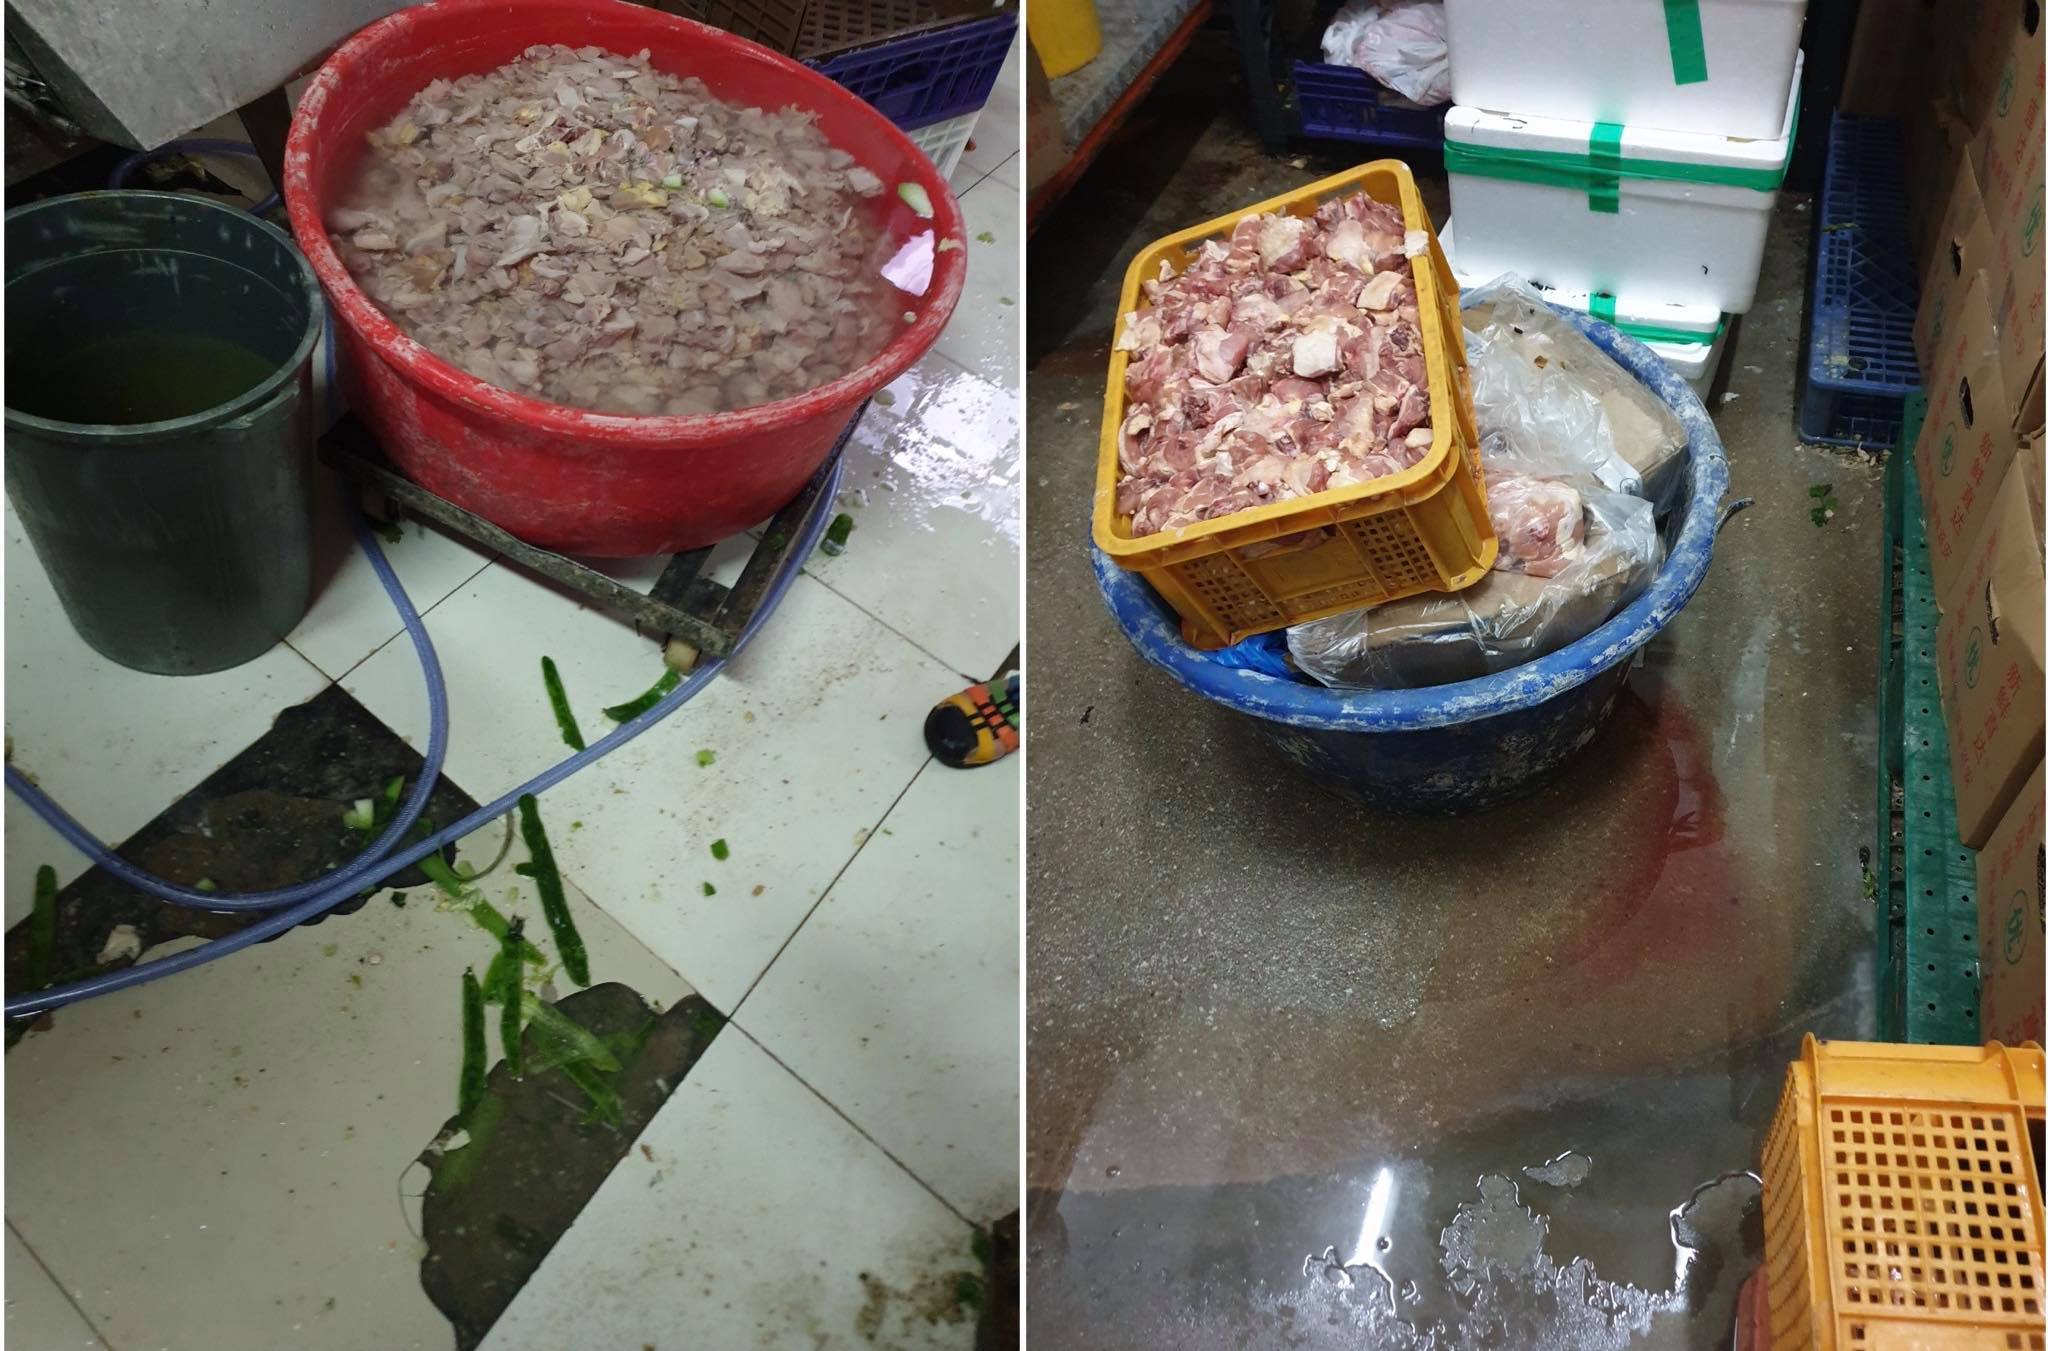 Scenes from AG (Global) Events Catering’s filthy kitchen. Photos: Singapore Food Agency/Facebook